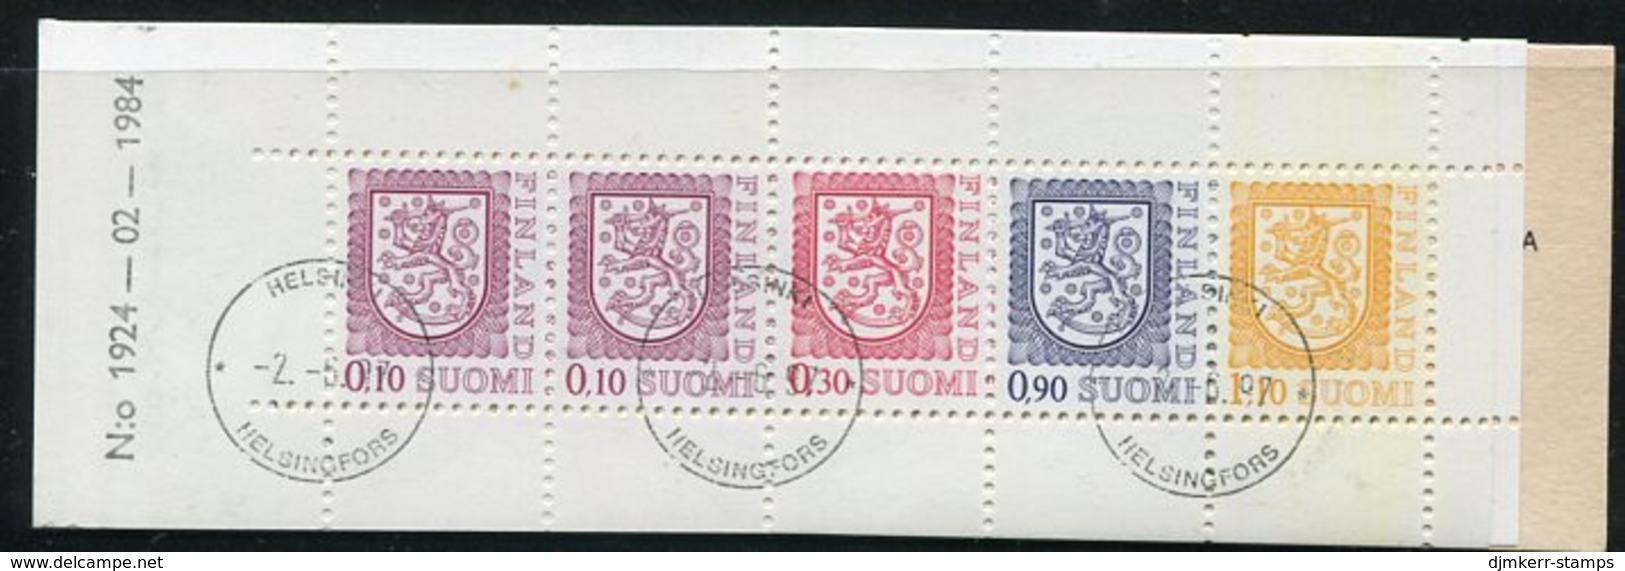 FINLAND 1980 Lion Definitive Type II 5 Mk. Complete, Cancelled.  Michel MH 12 II - Booklets